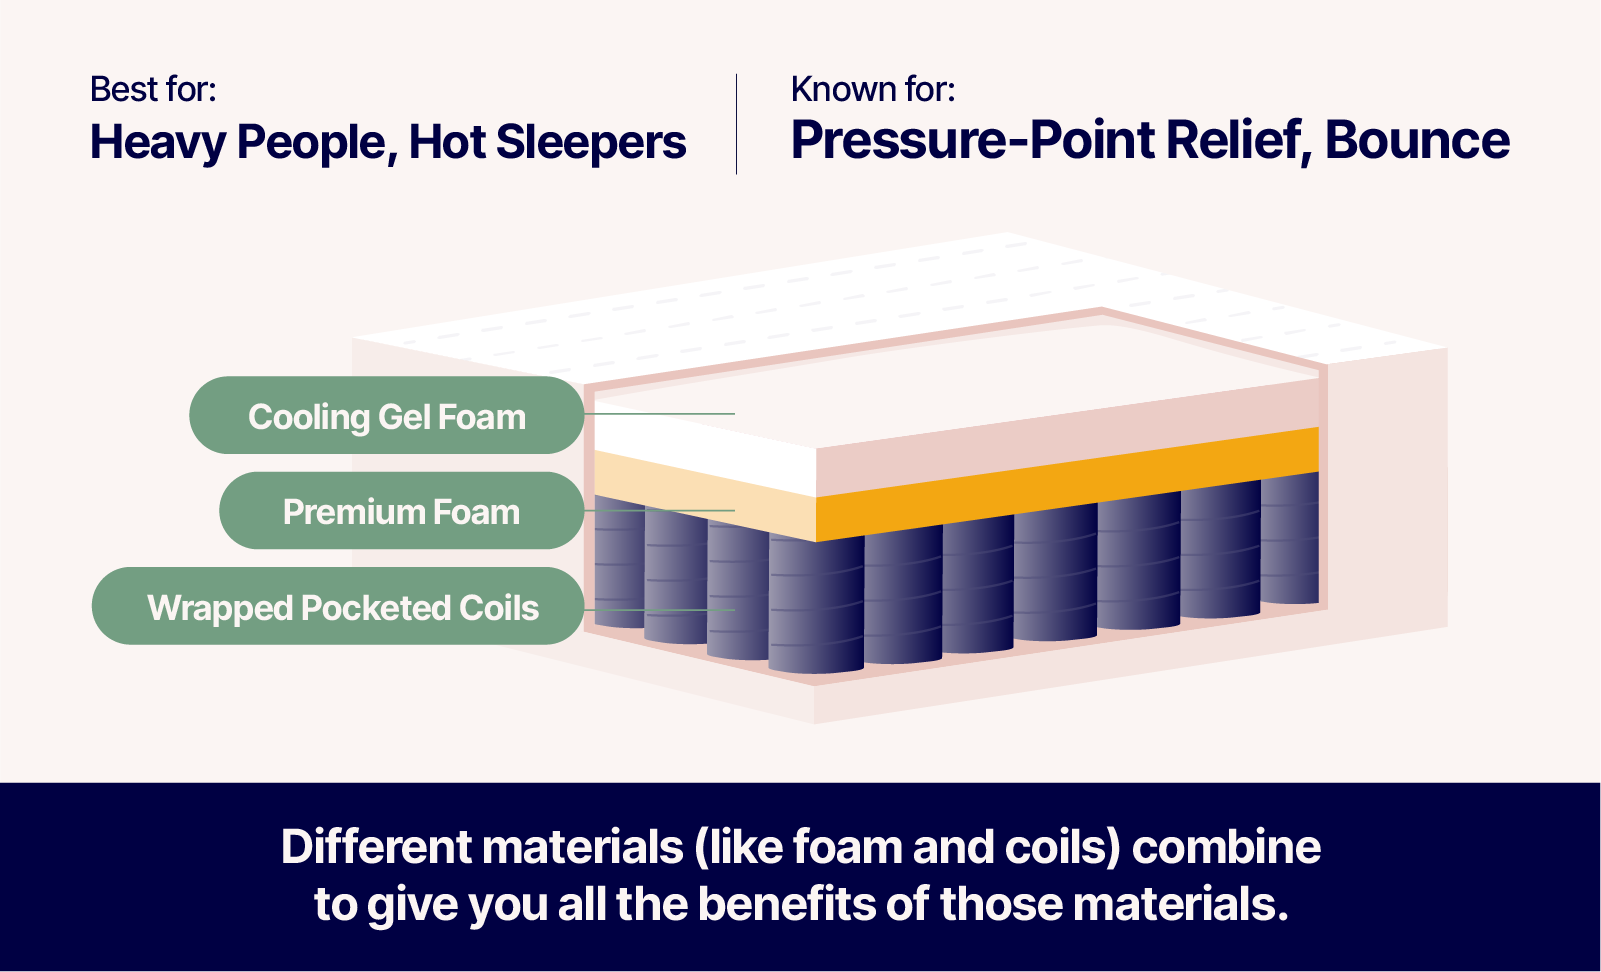 diagram of hybrid mattress showing cooling gel foam, premium foam, and wrapped pocket coil layers. Text says the mattress is best for heavy people and hot sleepers, and the mattress is known for pressure point relief and bounce. Description states that different materials (like foam and coils) combine to give you all the benefits of those materials.